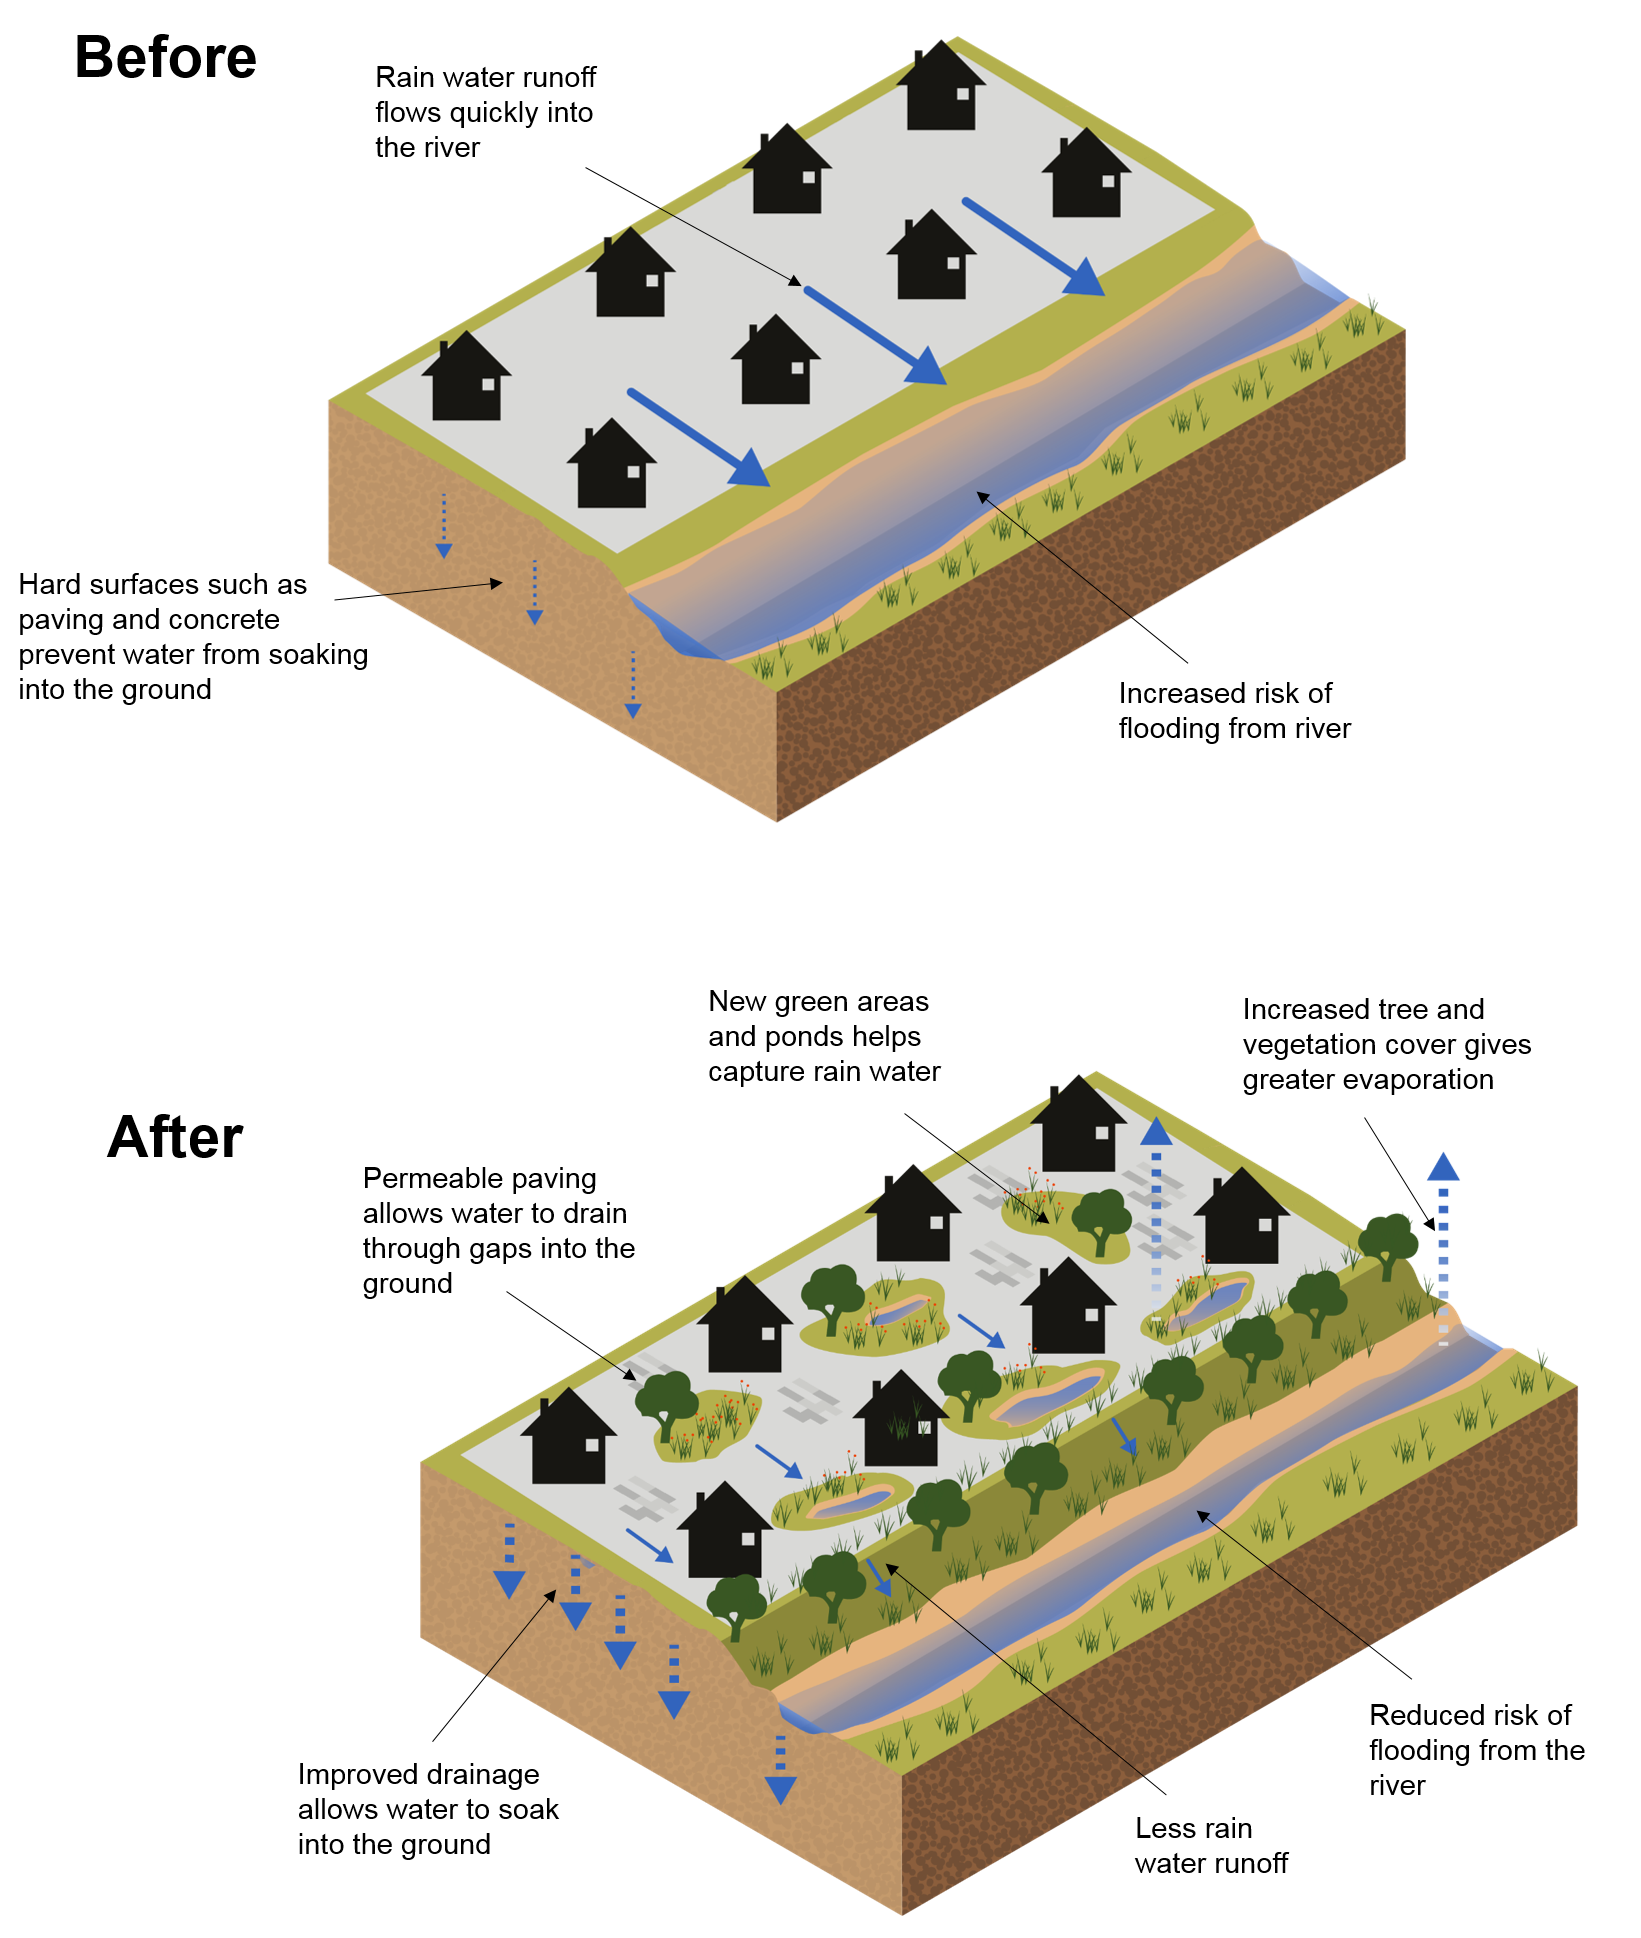 The before image shows how flooding happens before improving urban drainage. At the top of the image is a built-up area with buildings and hard surfaces such as paving and concrete, preventing water from soaking into the ground. The flow of water is shown to runoff quickly from the built-up area to a river. The after image shows how flooding happens once urban drainage has been introduced. At the top of the image is a built-up area with permeable paving allowing water to drain into the ground. New green areas and pond have been created between the buildings to help capture rainwater. Increased tree and vegetation cover gives greater evaporation. The amount of rainwater run off to the river is reduced.